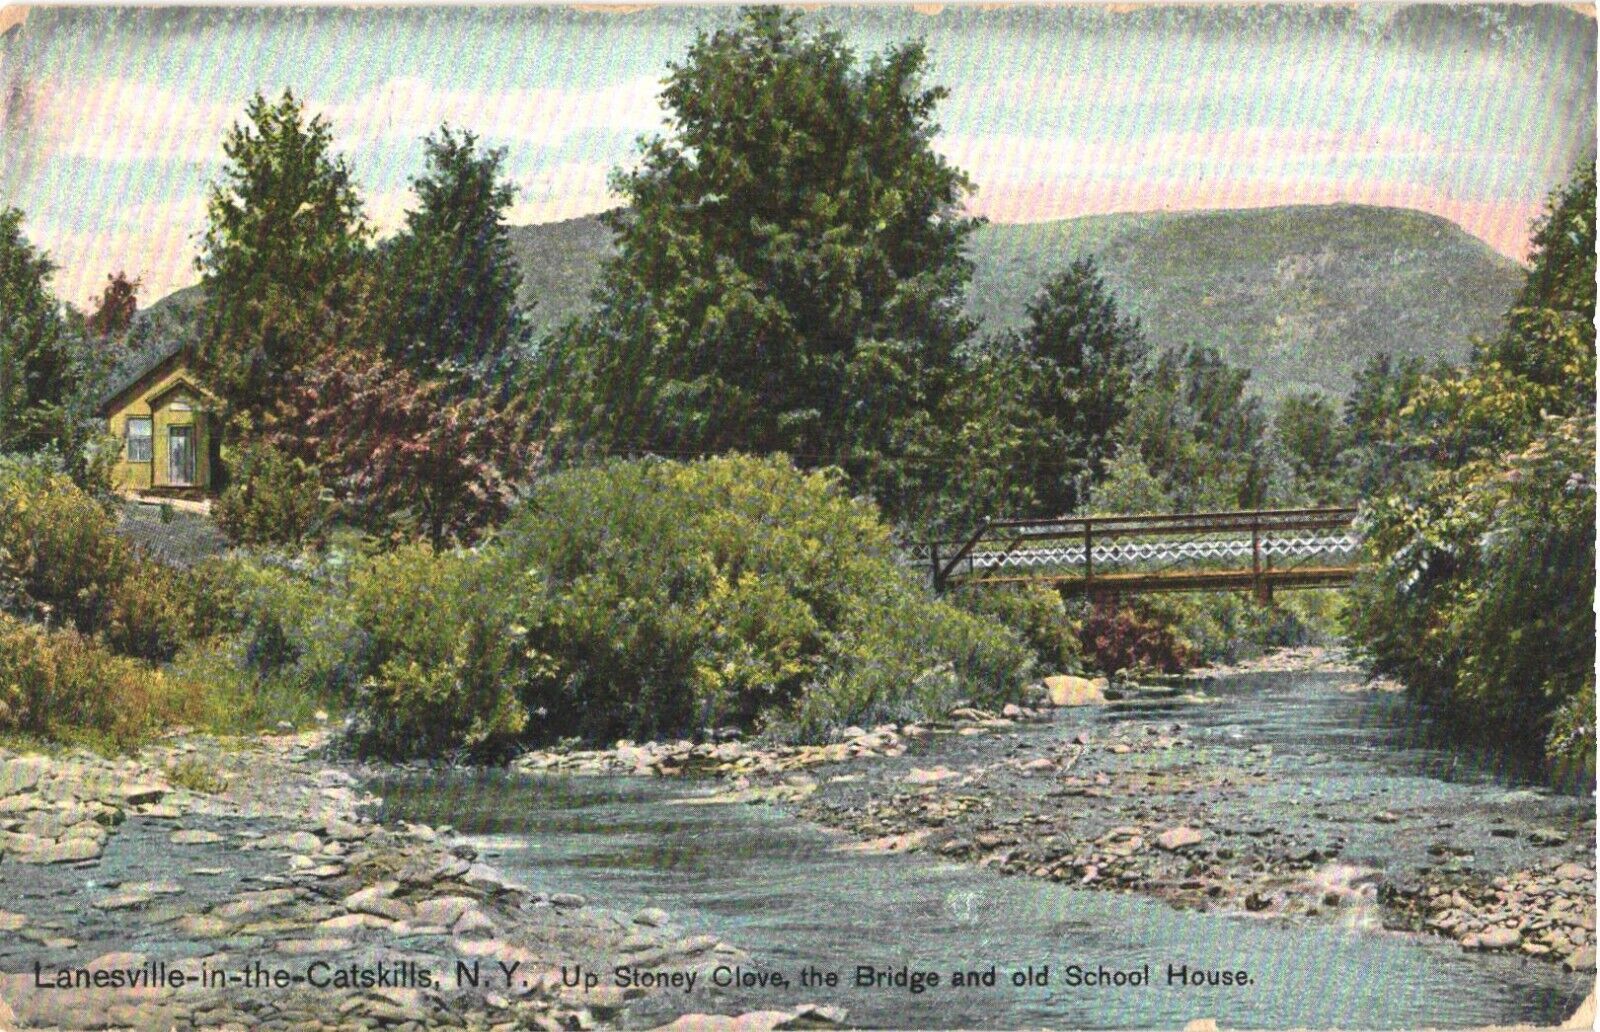 The Bridge and Old School House, Lanesville-in-the-Catskills, New York Postcard